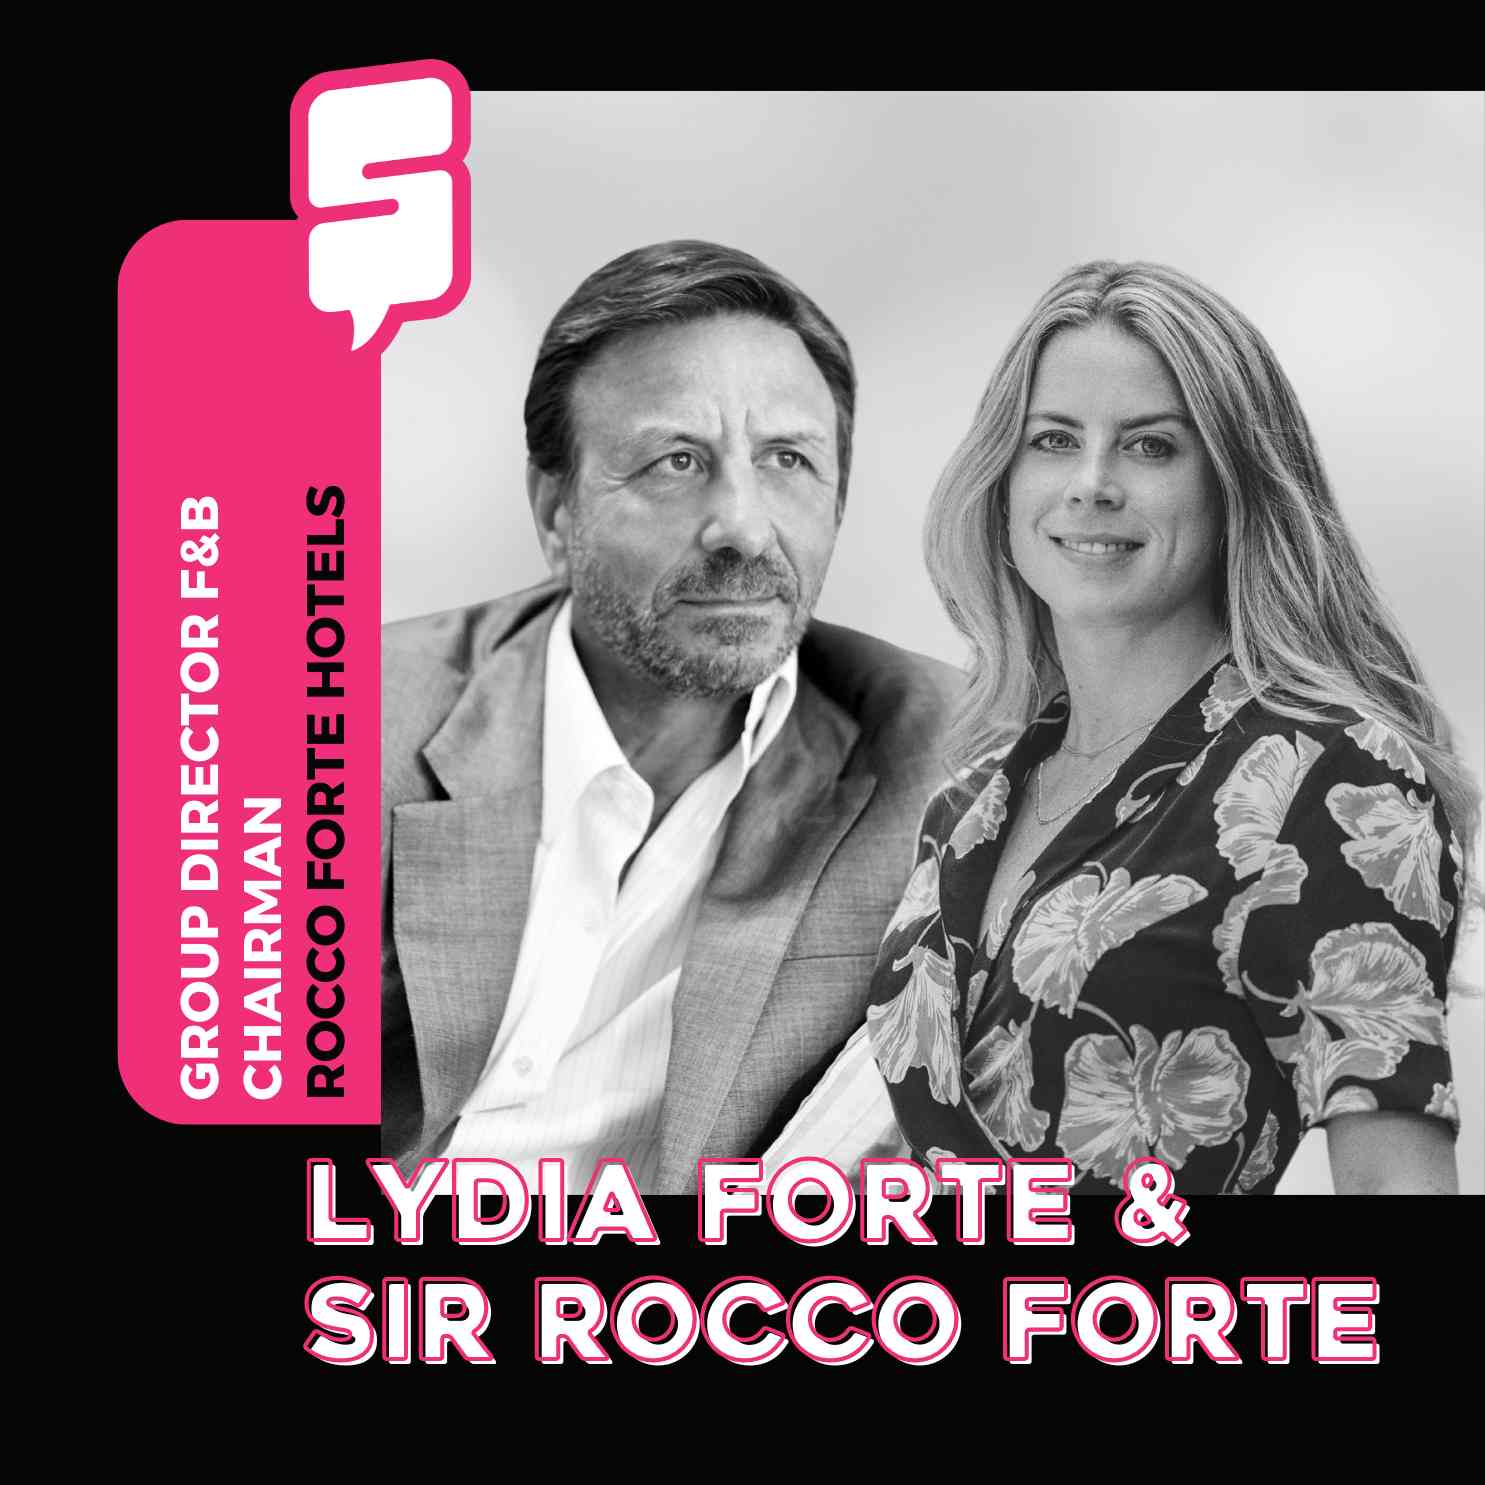 Sir Rocco & Lydia Forte | Rocco Forte Hotels – A family business and a way of life